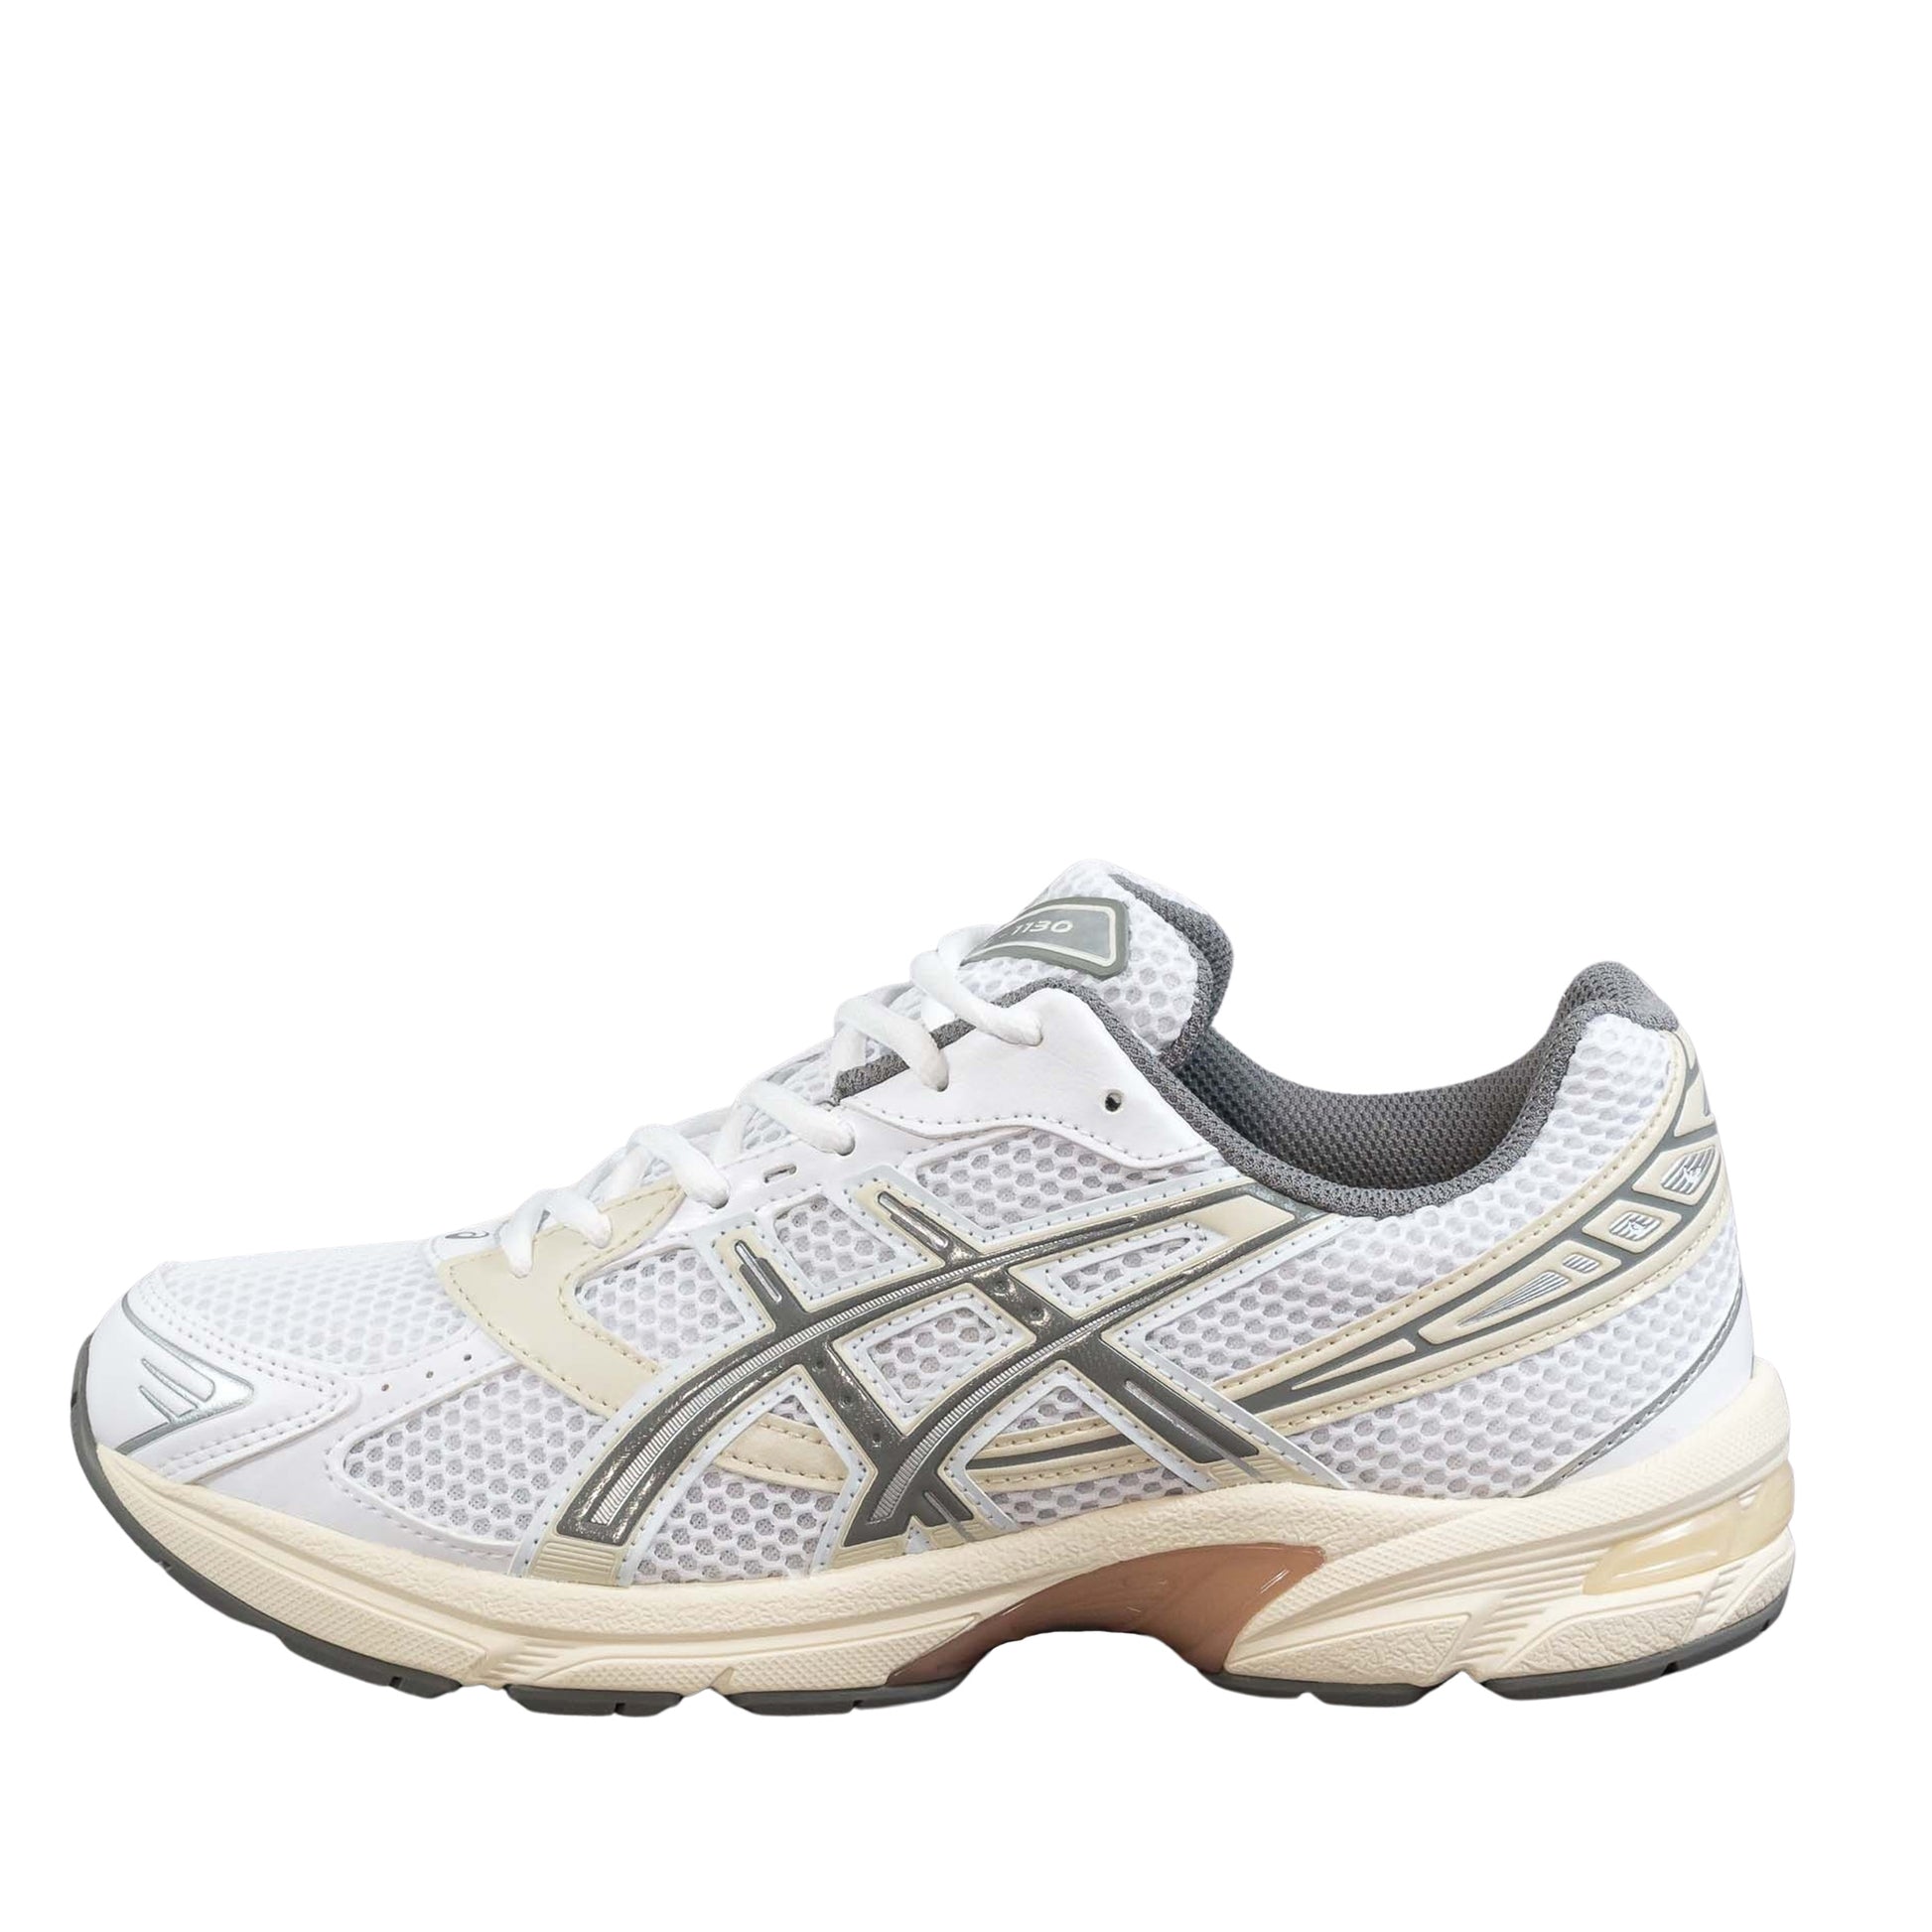 Asics Sportstyle Gel-1130 (1201A256-112) – Goldjunge-Store Weiss